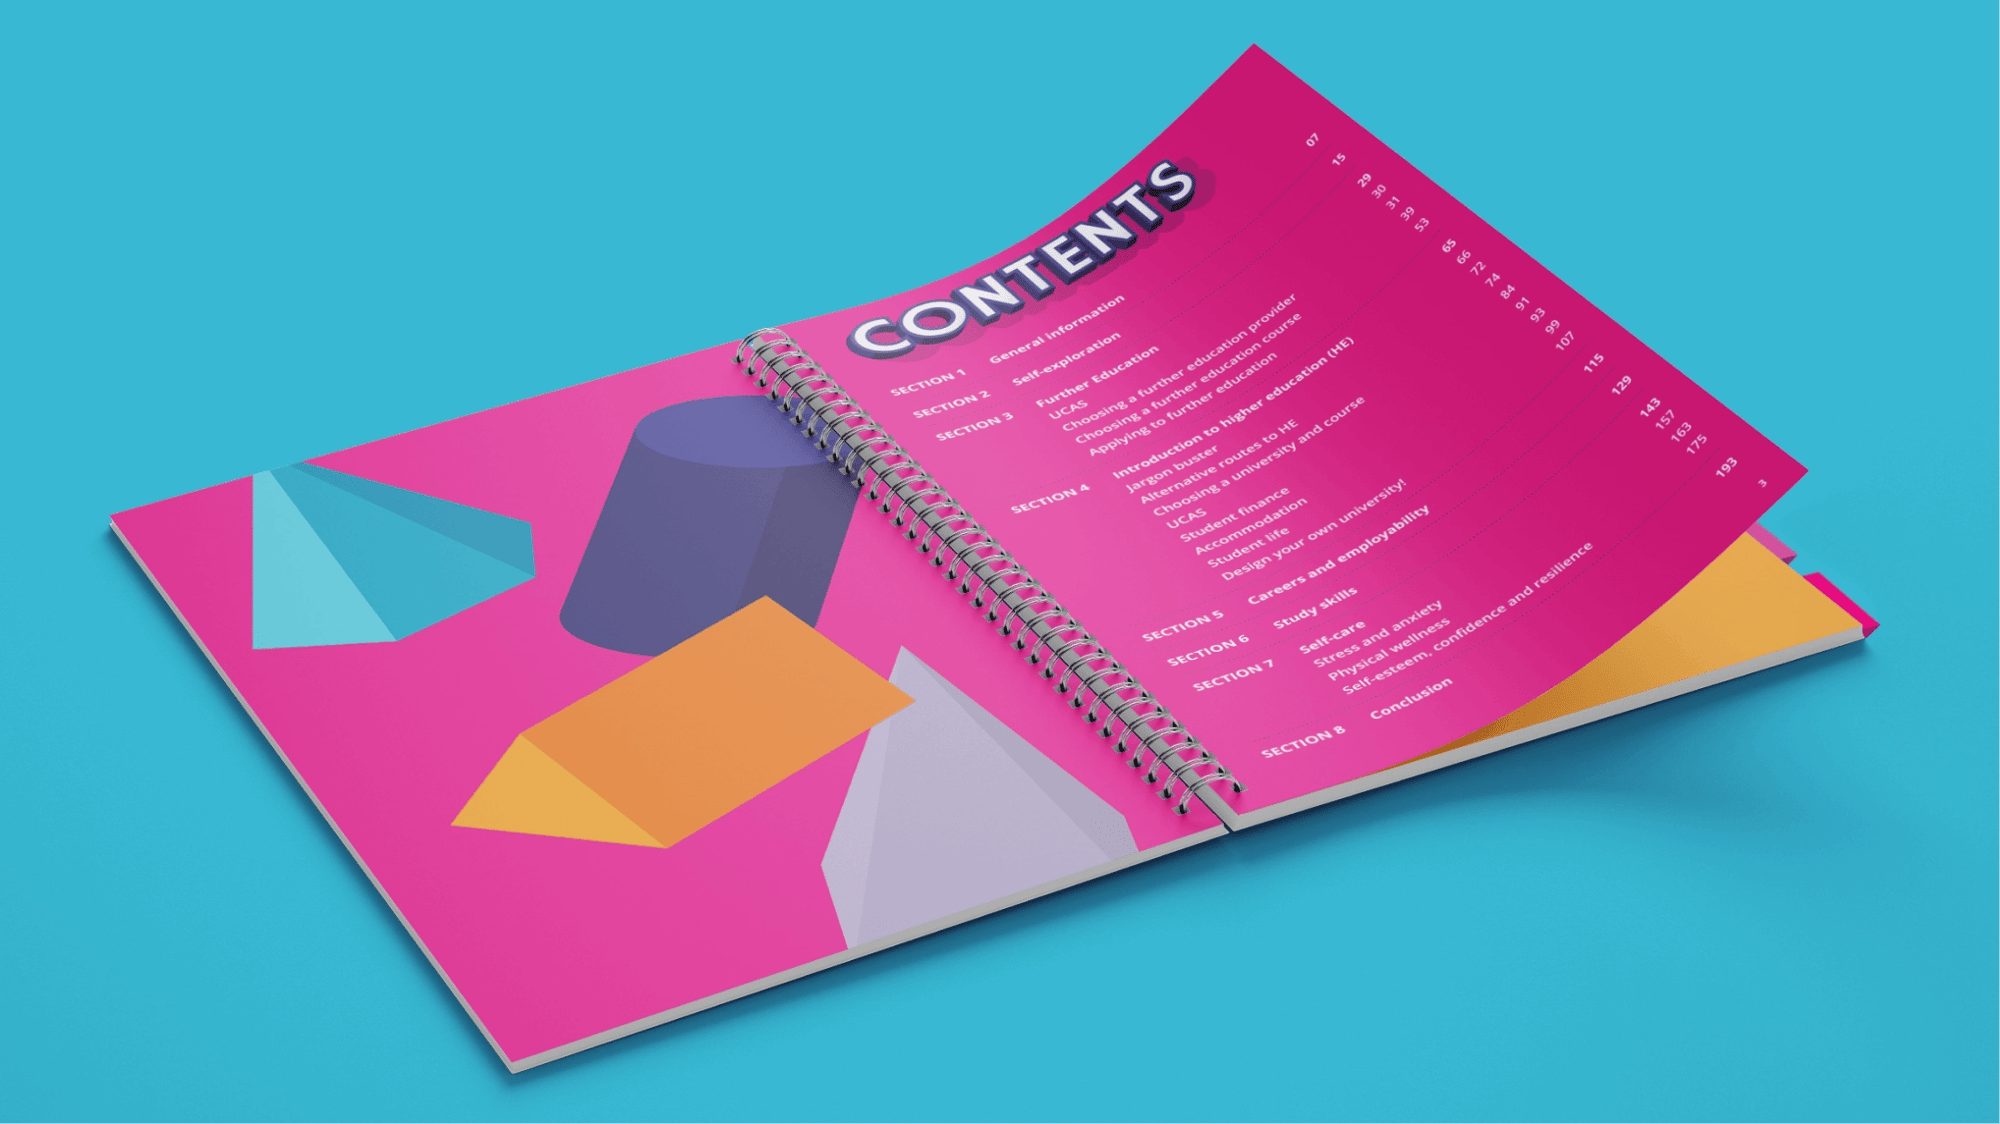 The contents page of the workbook we designed.